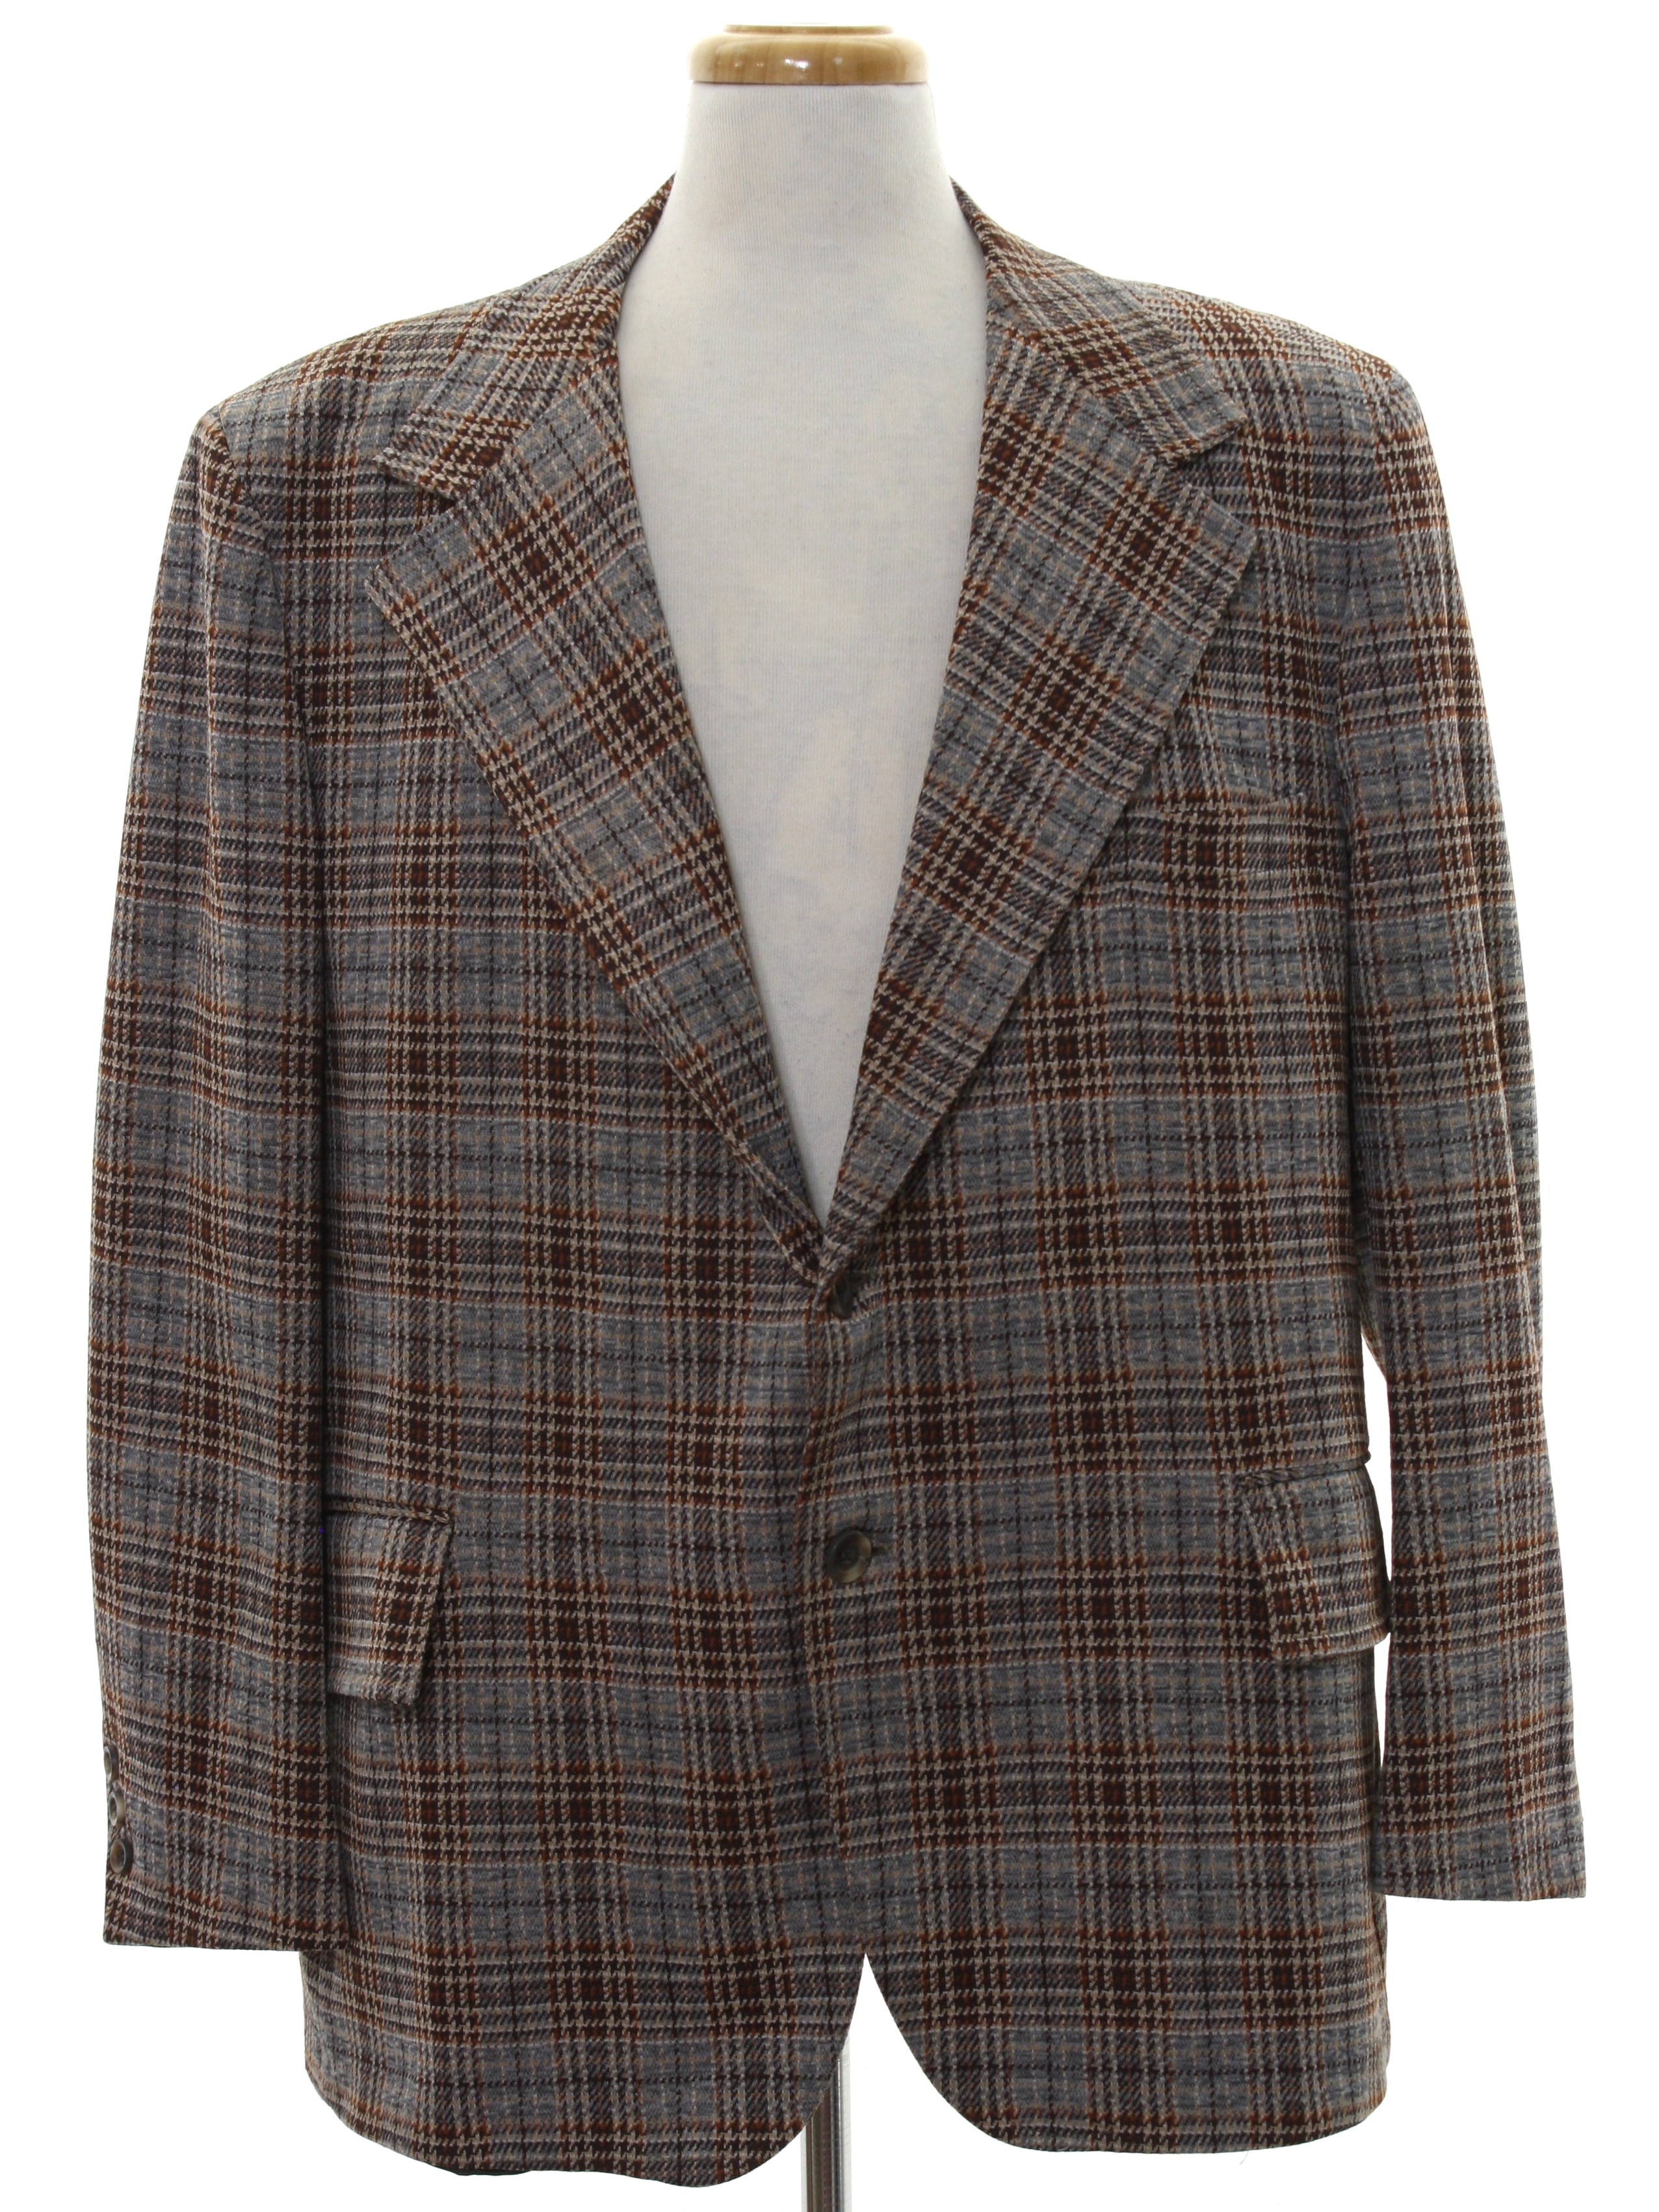 Retro 1970's Jacket (JCPenney) : 70s -JCPenney- Mens shades of brown ...